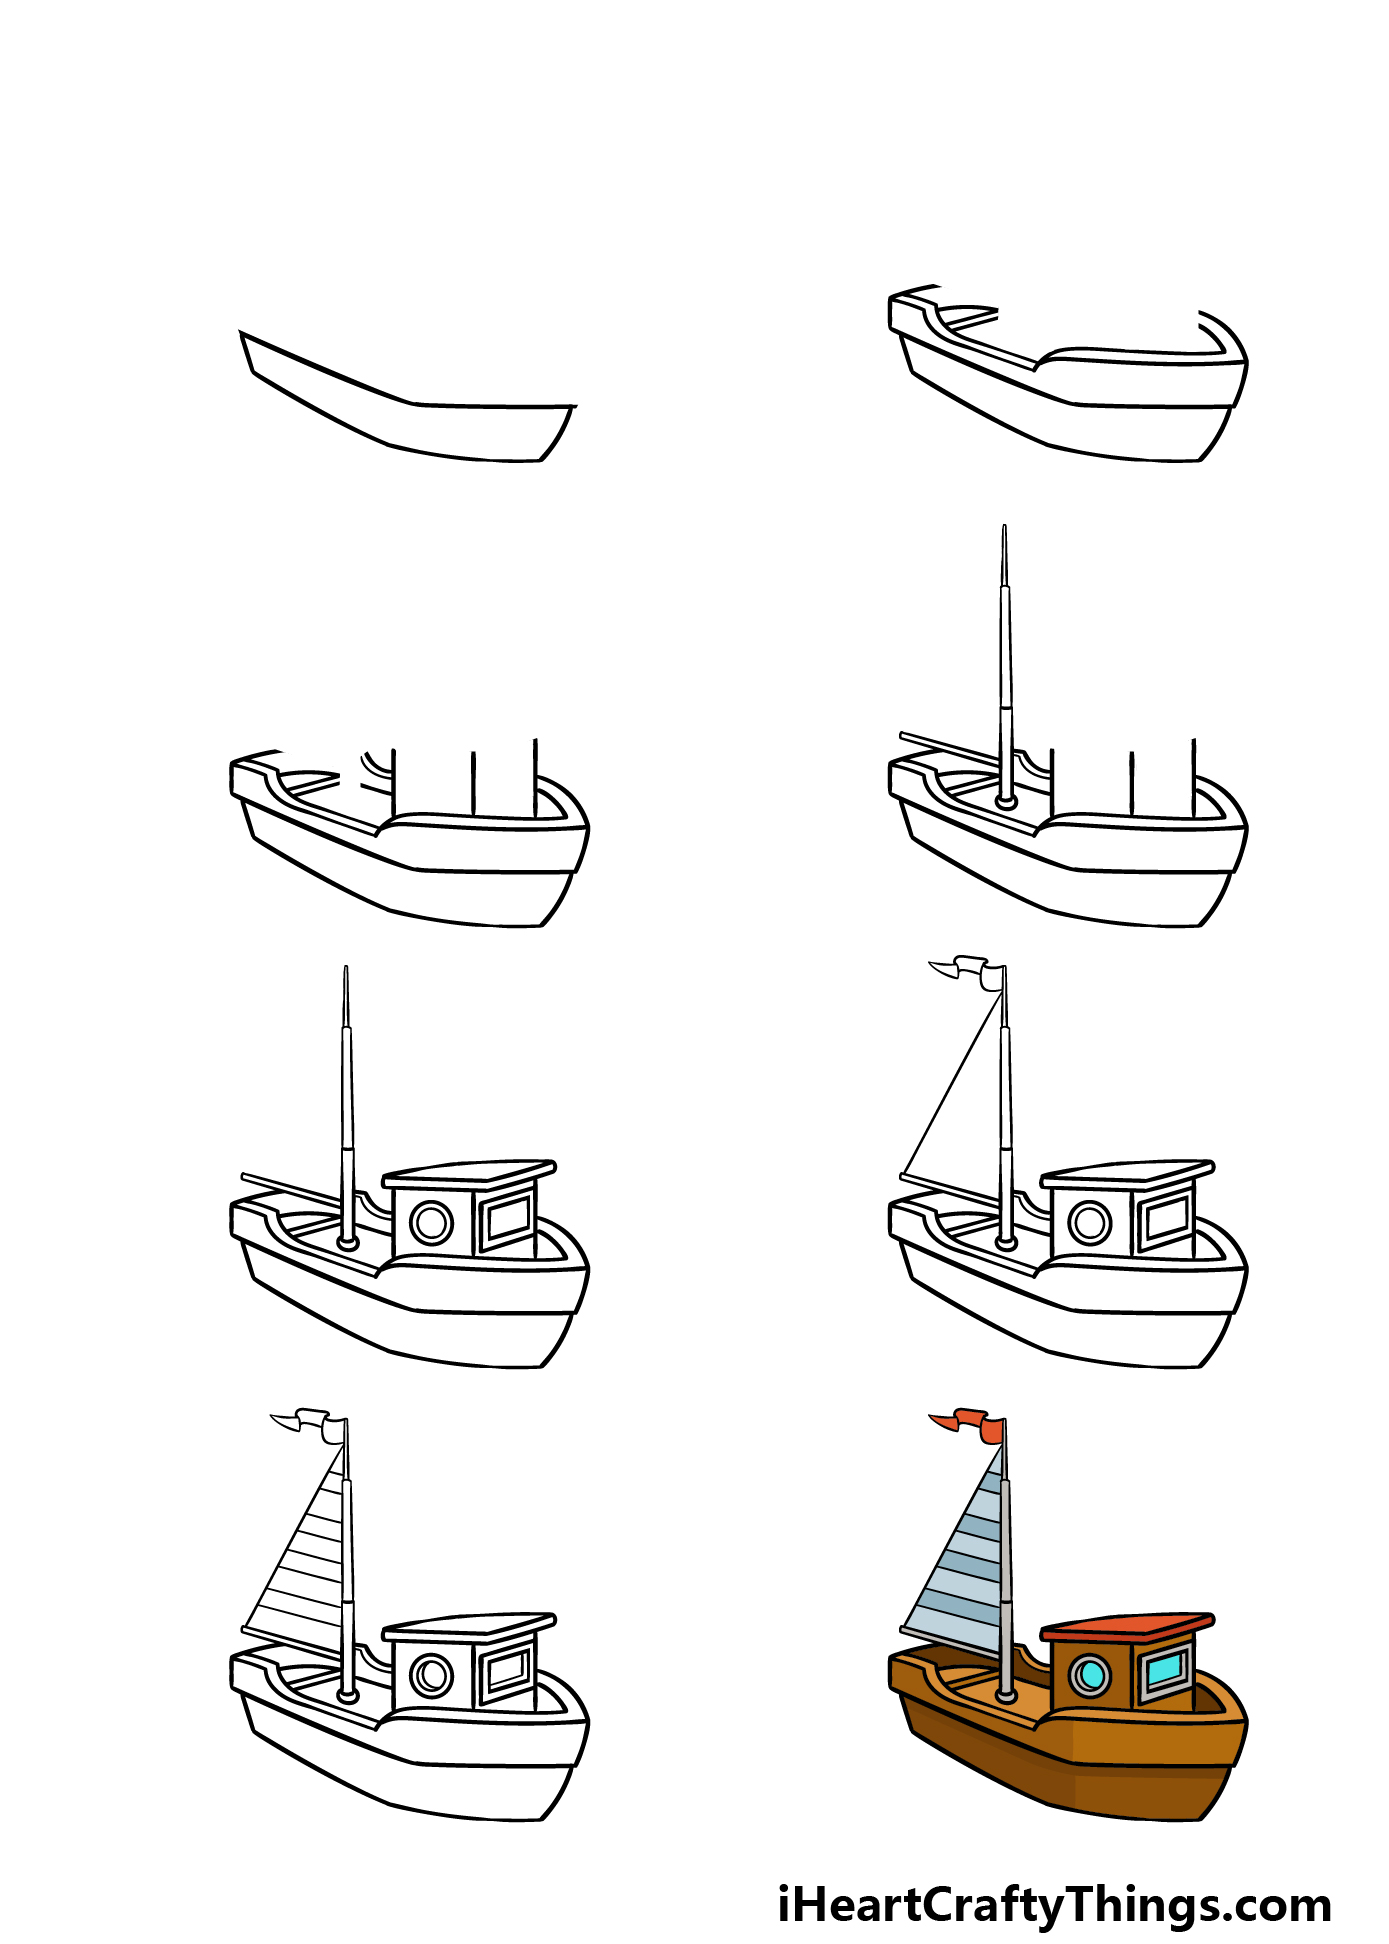 How to Draw A Boat Step by Step - EasyLineDrawing